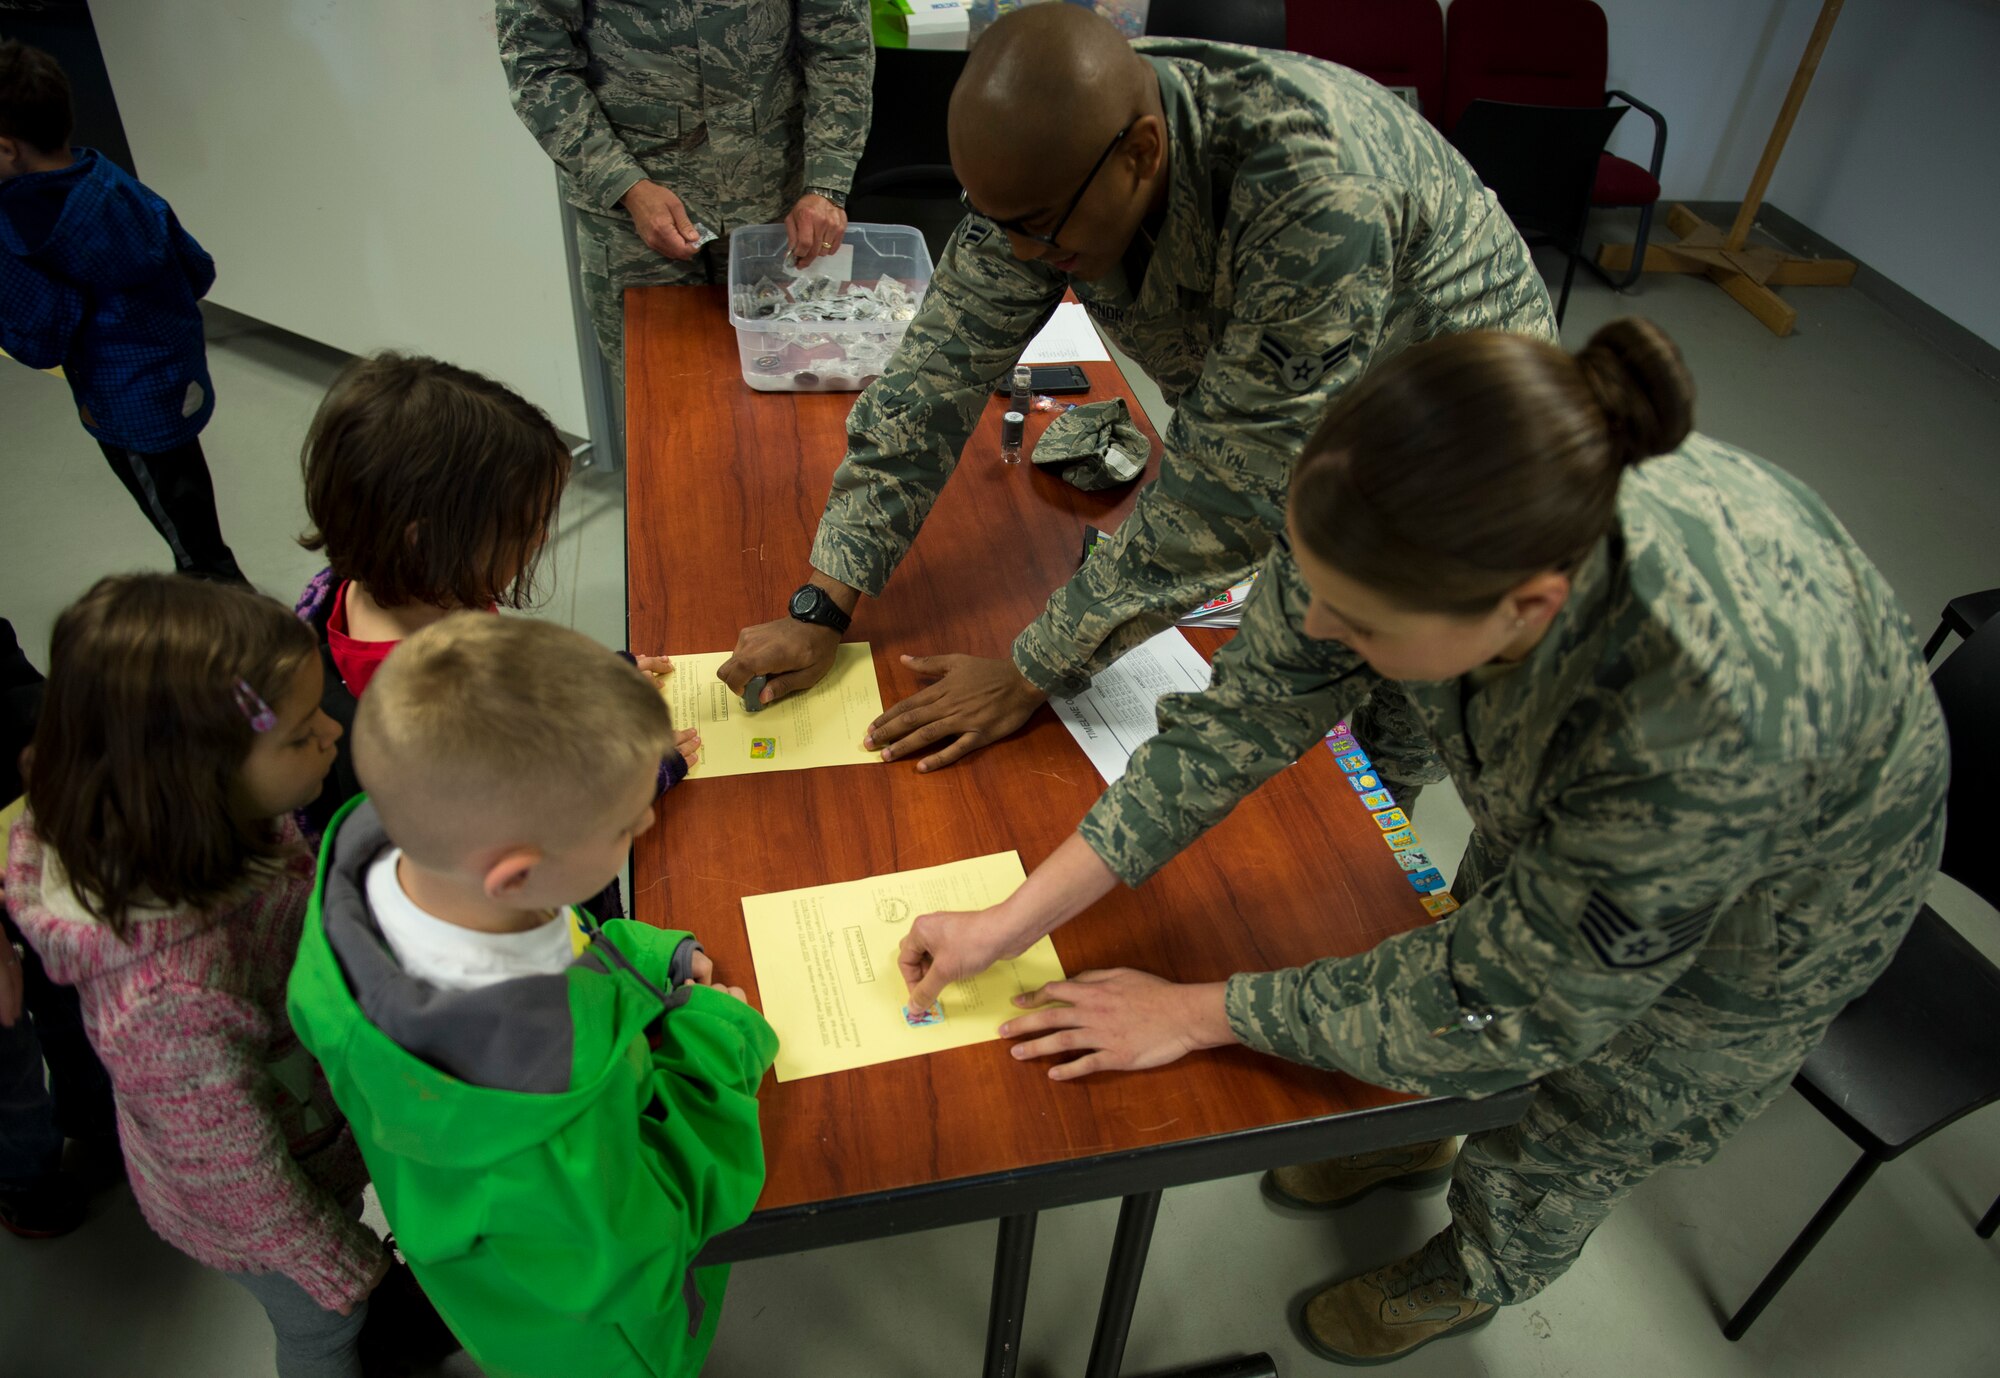 U.S. Air Force Airman 1st Class Vladimir Altenor and U.S. Air Force Staff Sgt. Katherine Solis, both 52nd Aerospace Medicine Squadron public health technicians, stamp orders and give out stickers during Kids’ Deployment Day at Spangdahlem Air Base, Germany, April 29, 2015. Altenor and Solis presented information on health issues the students might face on their simulated deployment to Rio De Janeiro. (U.S. Air Force photo by Airman 1st Class Luke Kitterman/Released)
